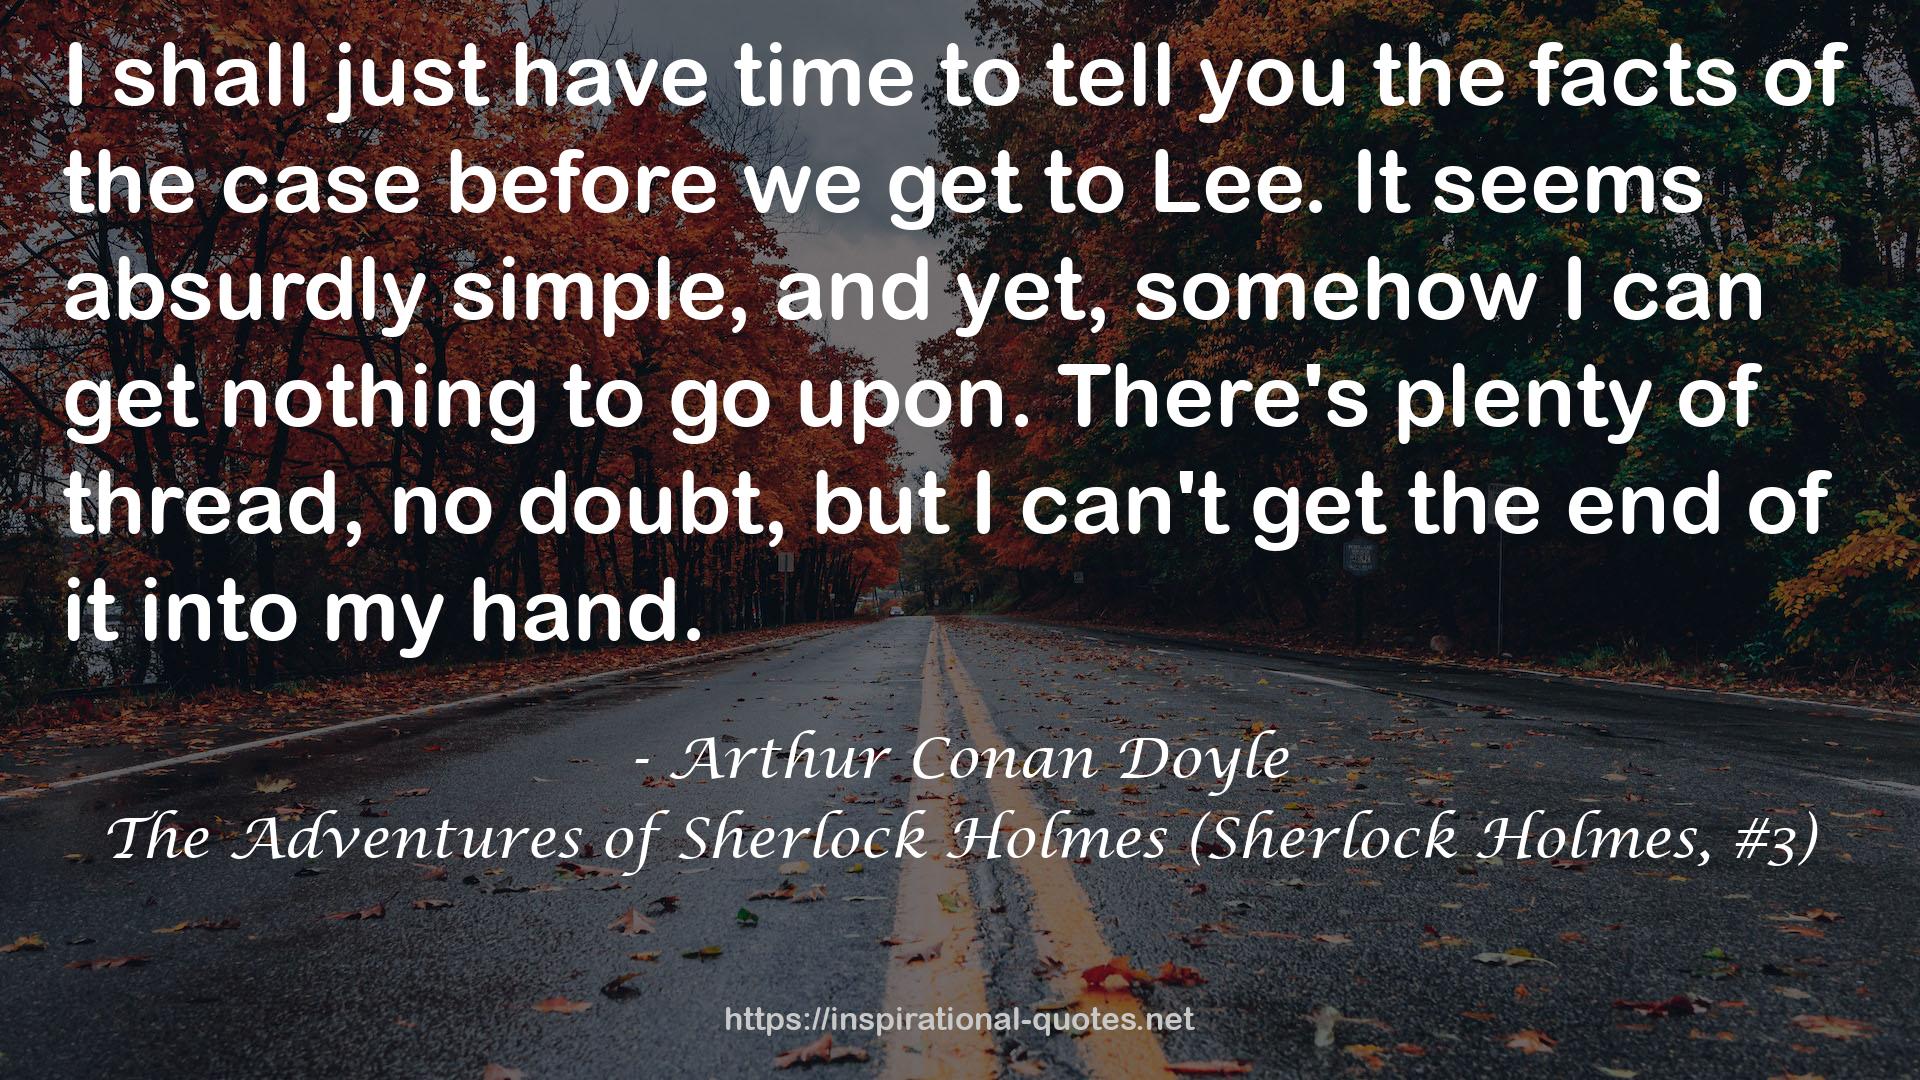 The Adventures of Sherlock Holmes (Sherlock Holmes, #3) QUOTES